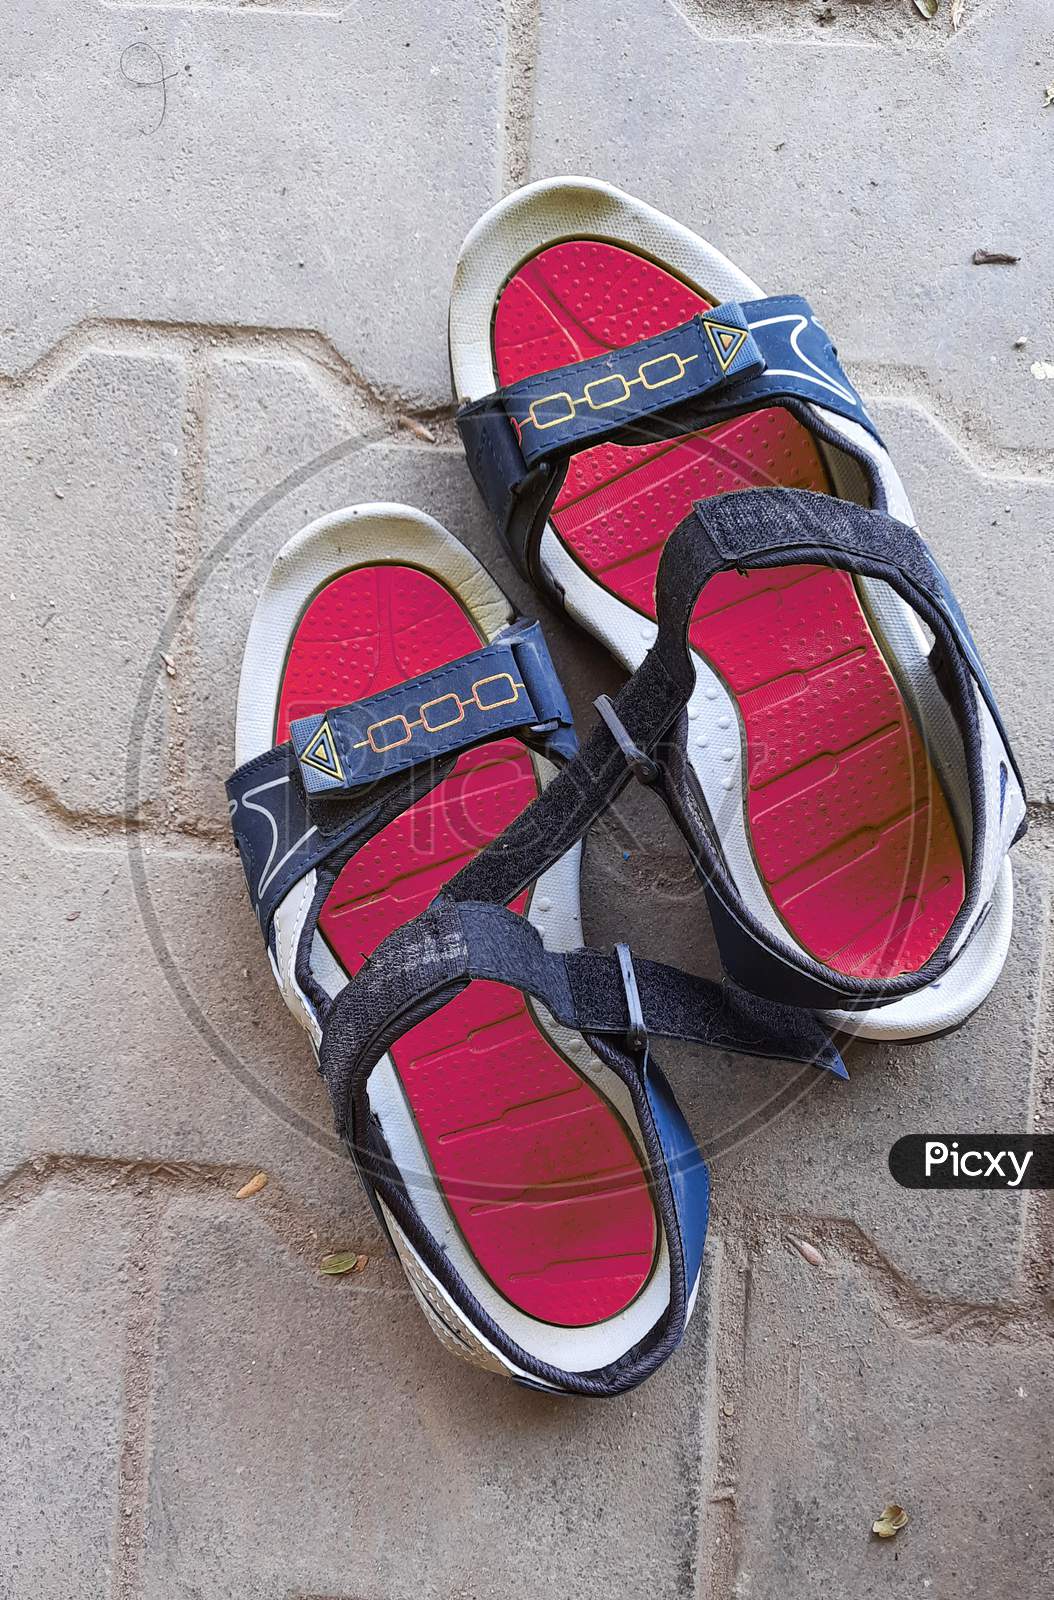 Closeup Of Pair Red Or Pink And Blue Color New Sandals In A Empty Road